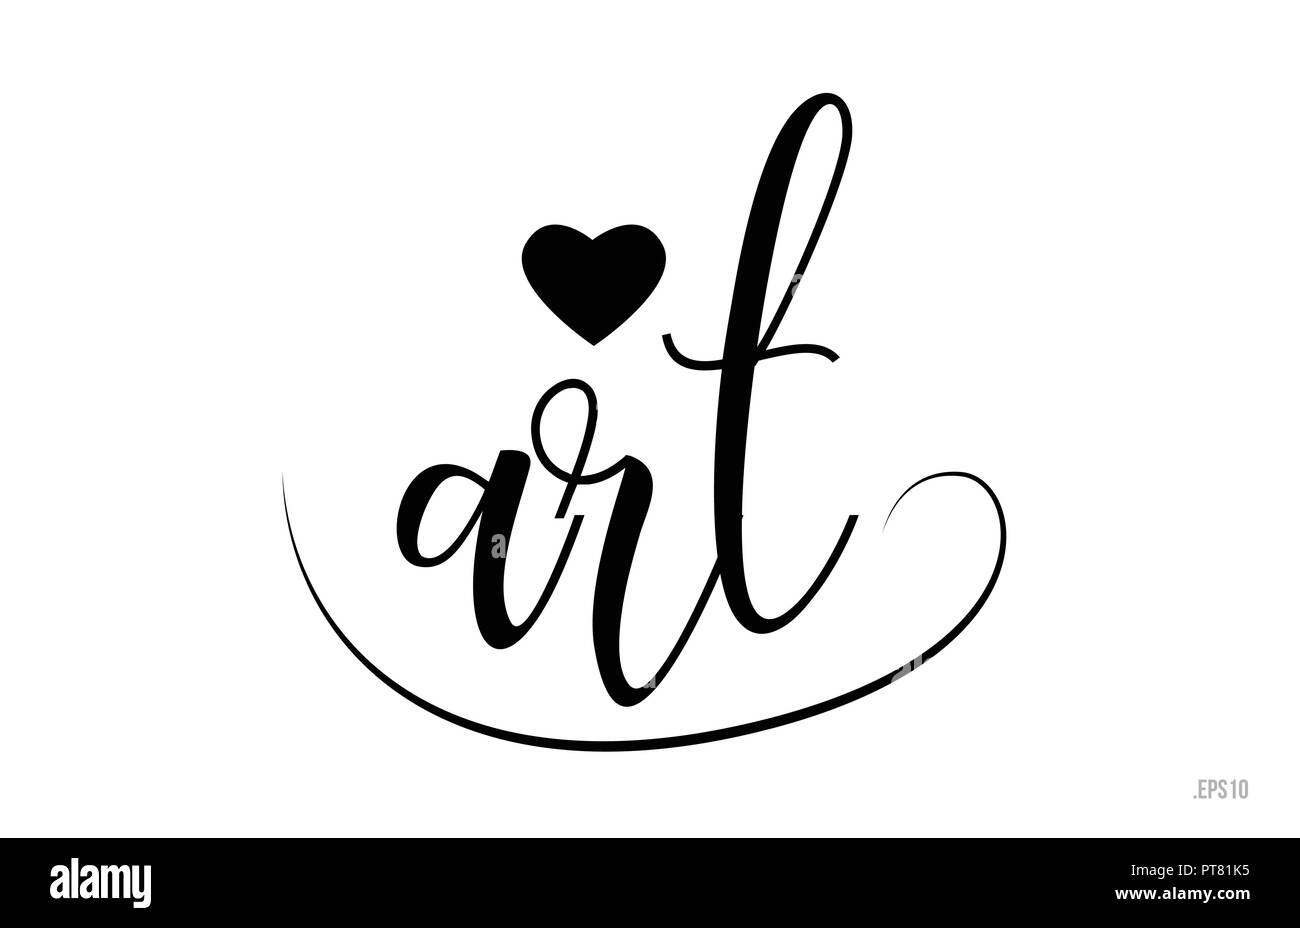 https://c8.alamy.com/comp/PT81K5/art-word-text-with-black-and-white-love-heart-suitable-for-card-brochure-or-typography-logo-design-PT81K5.jpg